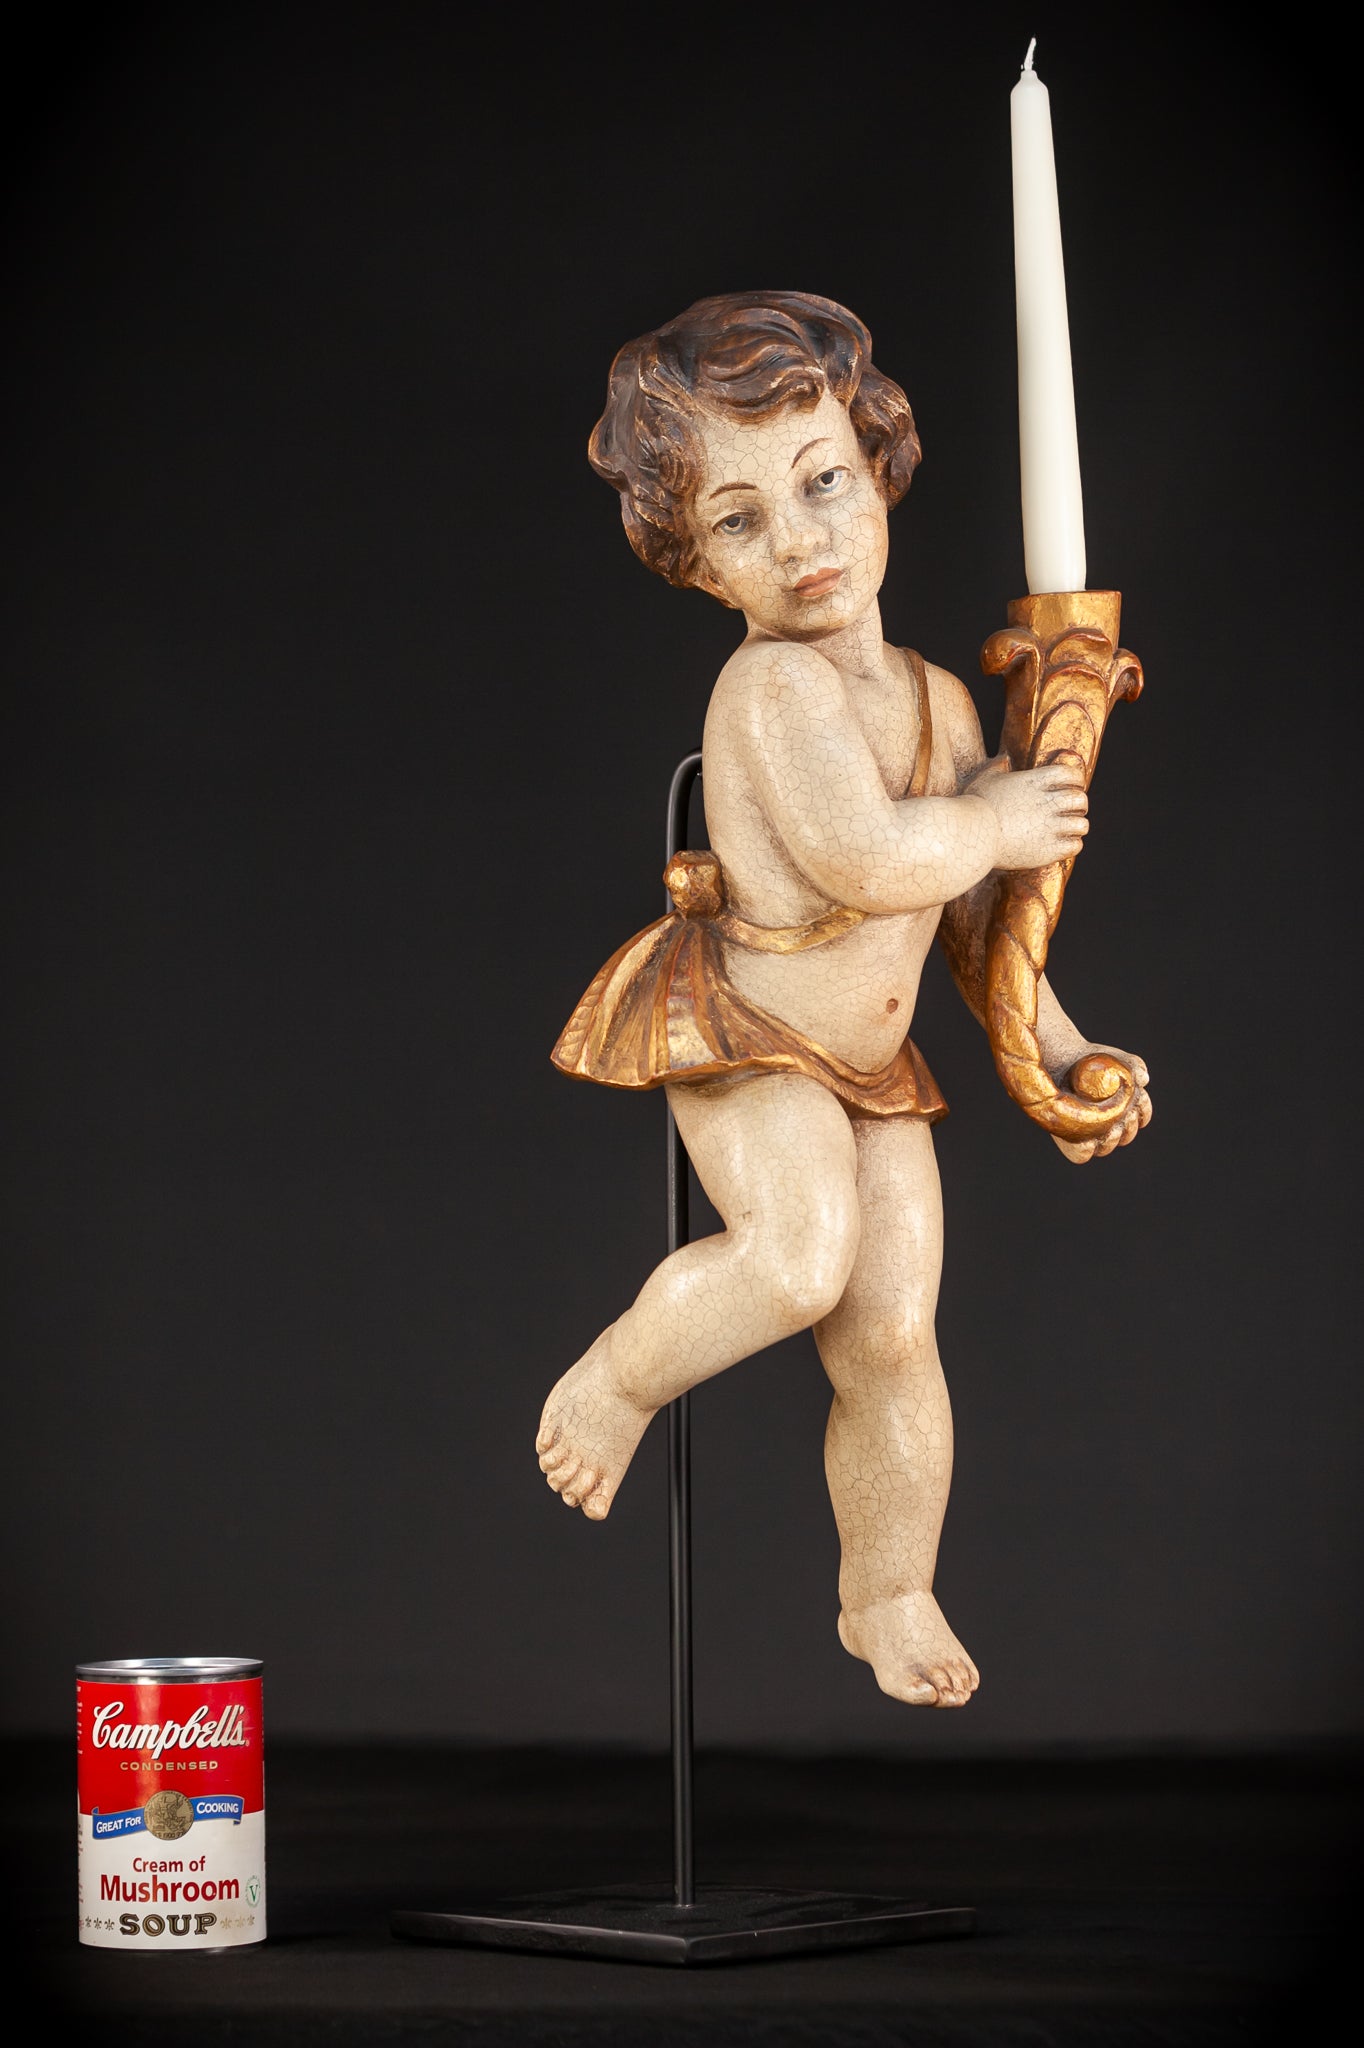 Angel Candle Bearing Wooden Sculpture | mid 1900s Vintage | 20.3" / 51.5 cm